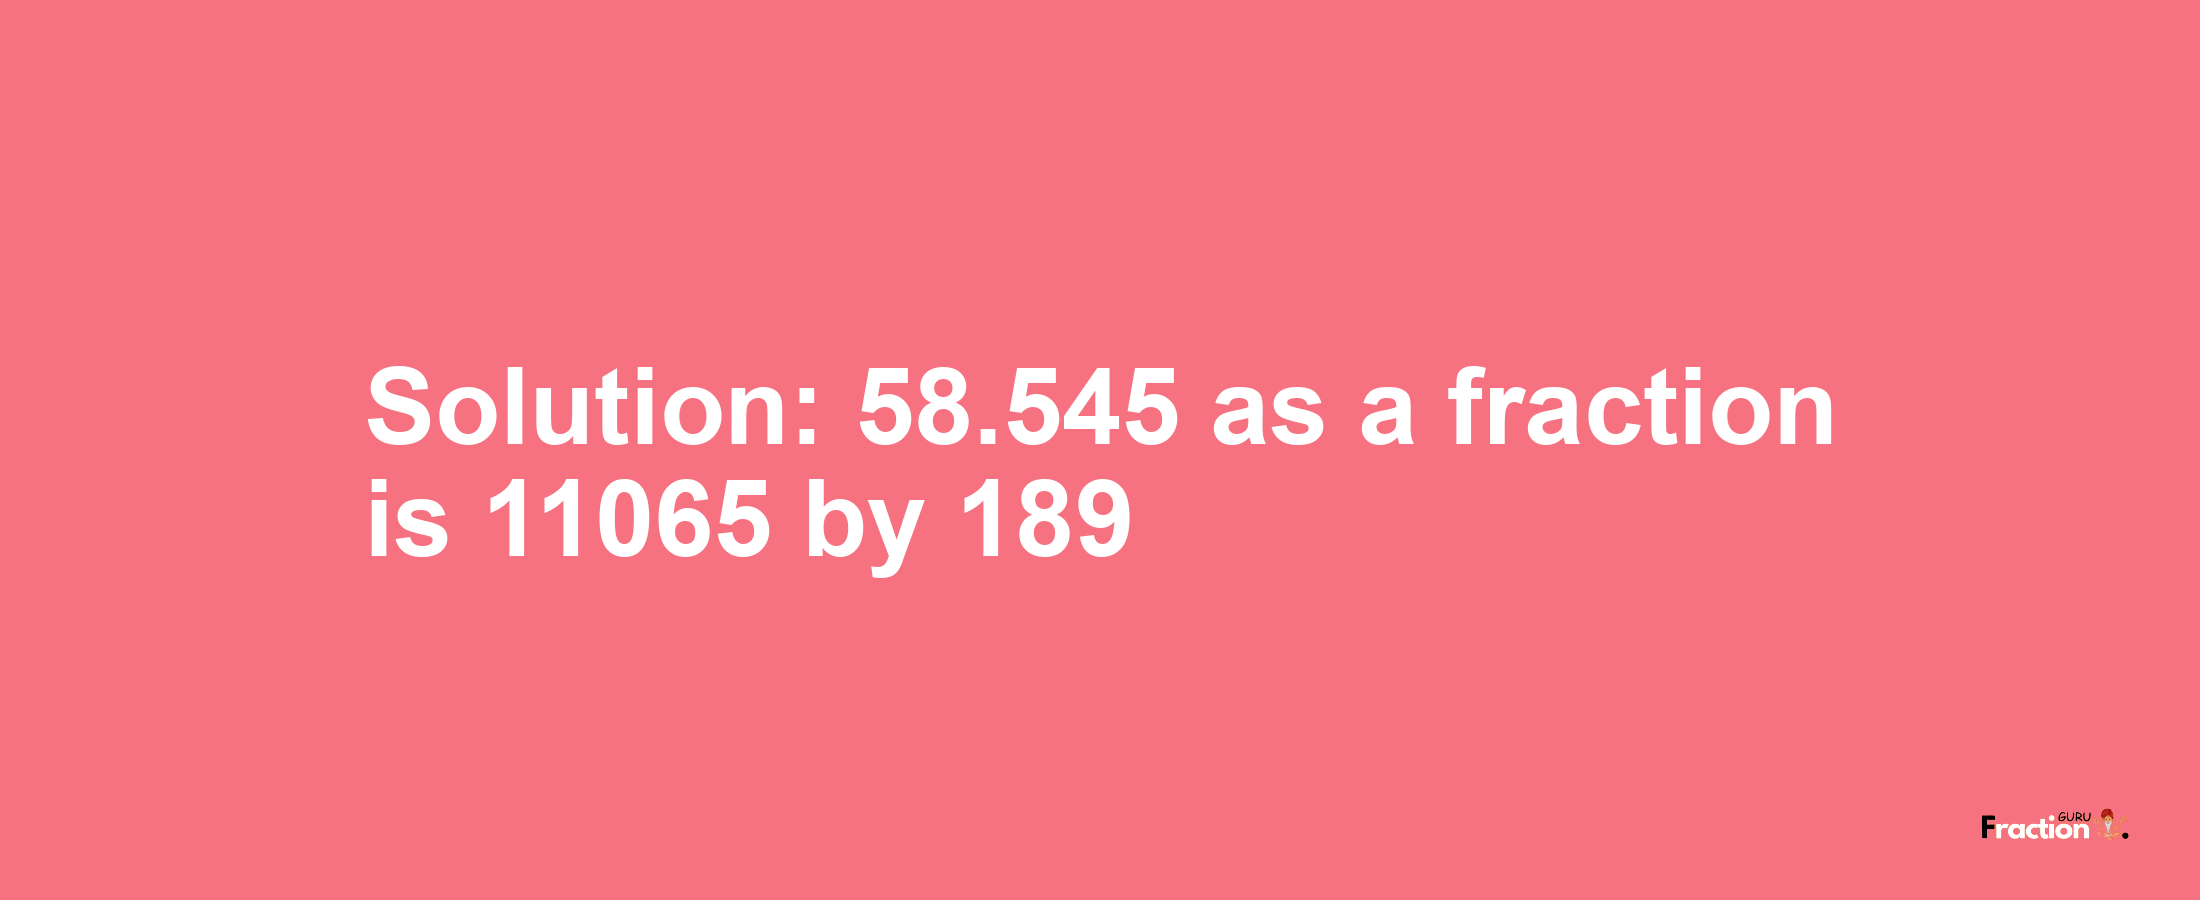 Solution:58.545 as a fraction is 11065/189